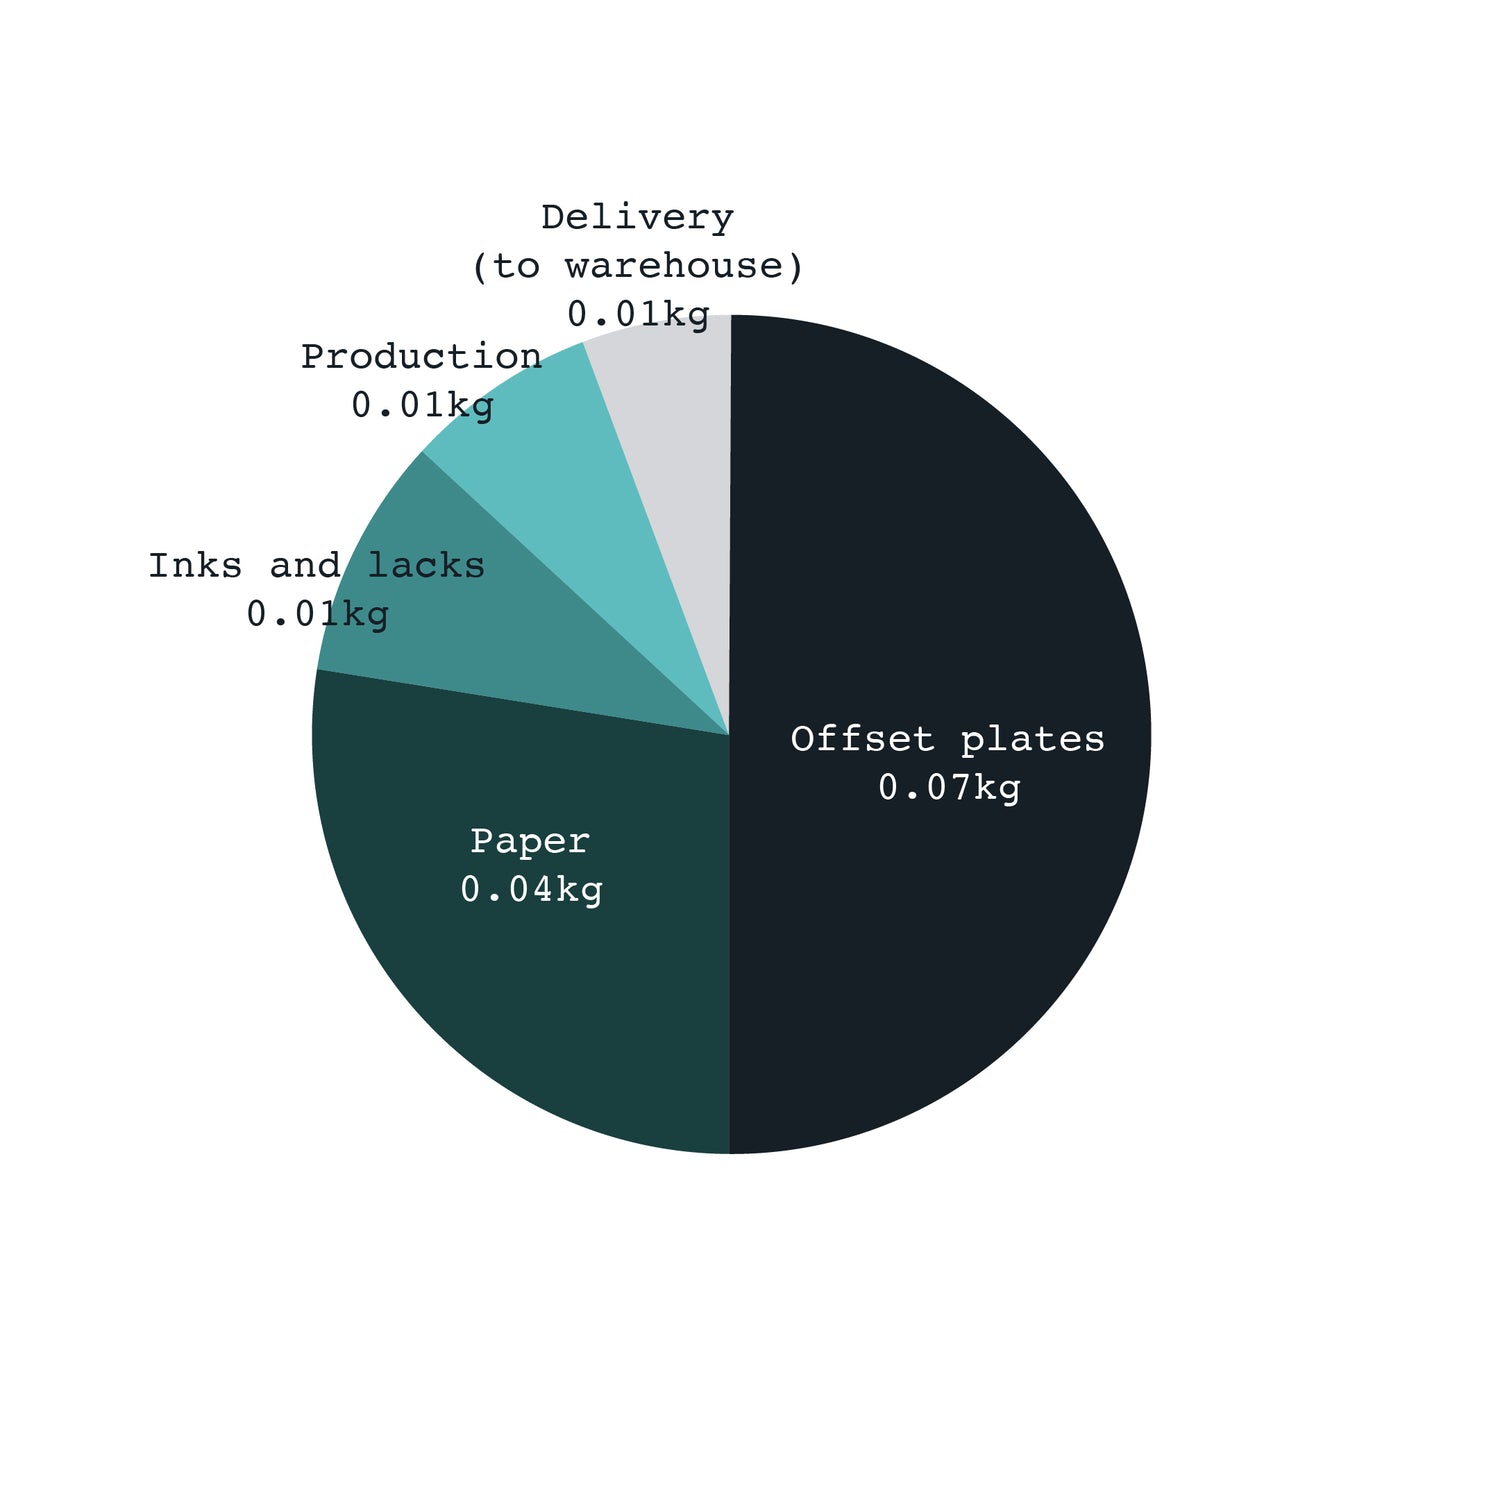 CO2e breakdown for Polar Embassy Coloring Books. A pie chart in Polar Embassy's brand colours (glacial ice dark blues and greens): Offset Plates (0,07kg), Paper (0.04kg), Inks and lacks (0,01kg), Production (0,01kg), Delivery (to warehouse) (0,01kg)